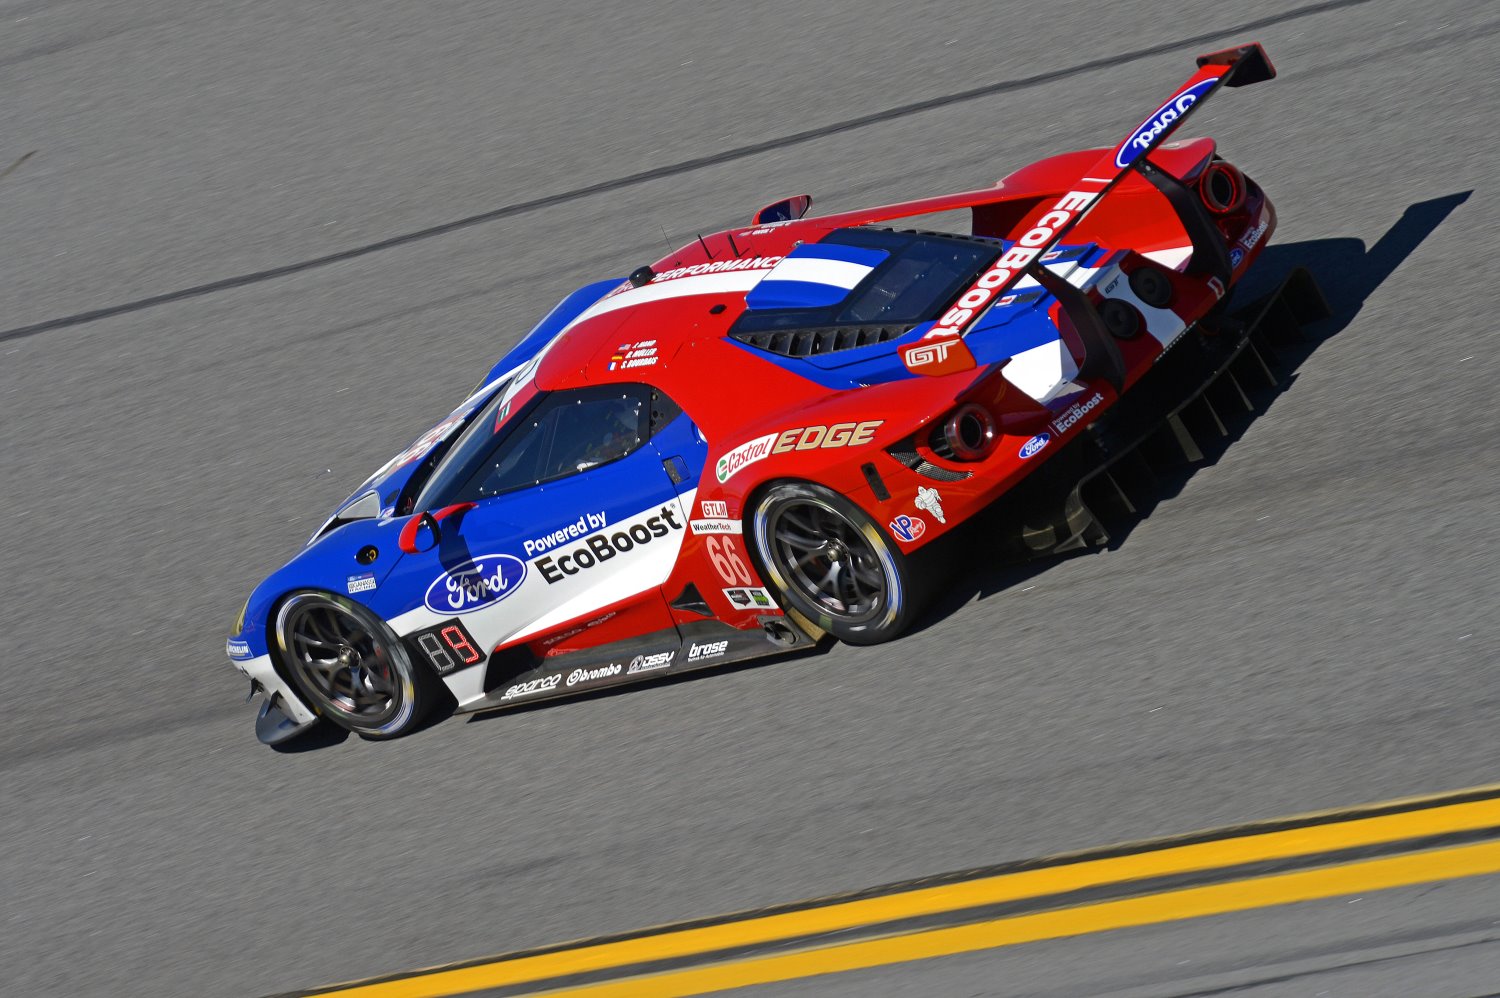 Will the Ford GTs be Found On Road Dead (Ford) like they were in the Rolex 24?